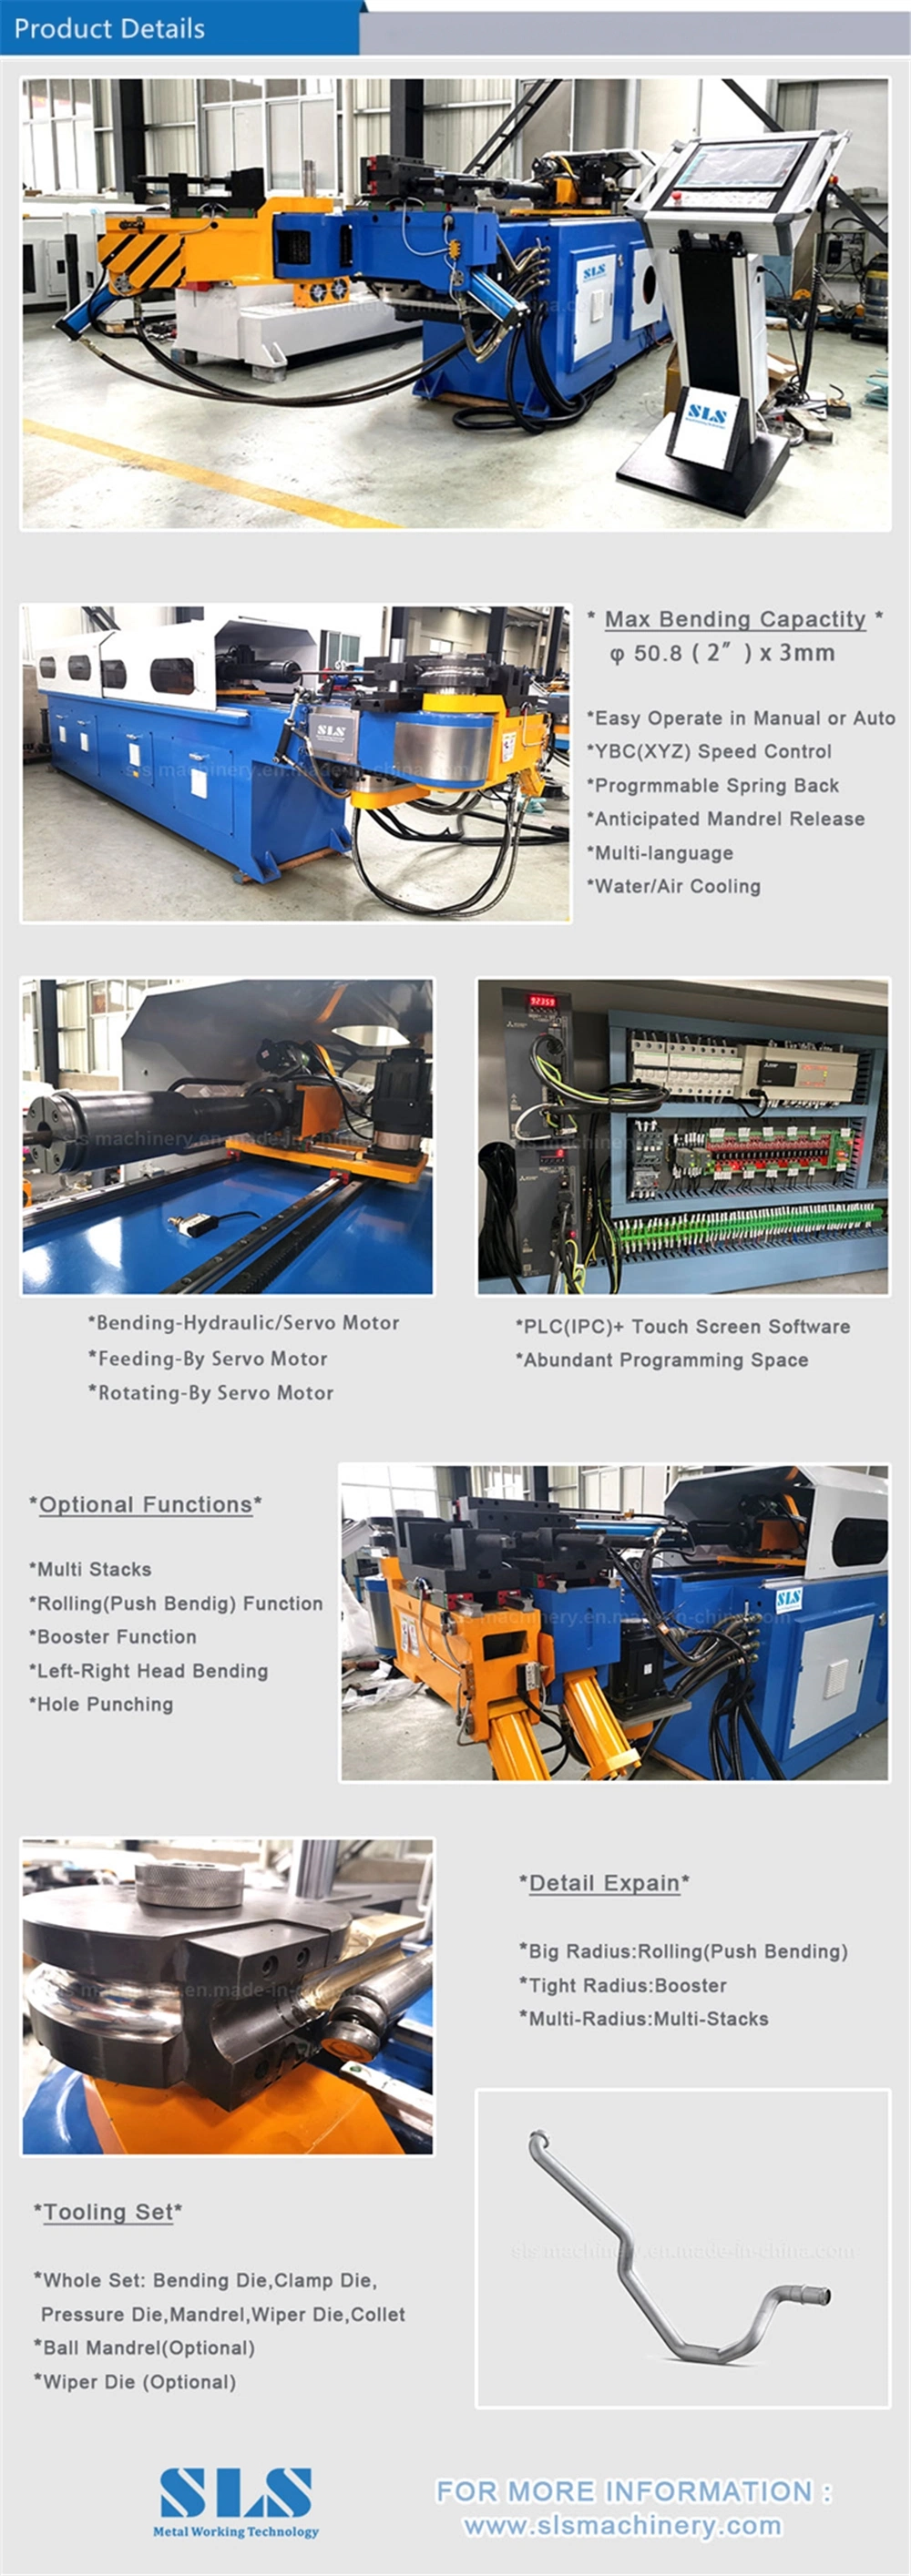 Custom Cutting and Punching Functions Metal Tube Profile 3D CNC Automatic Pipe Bending Machine with CE